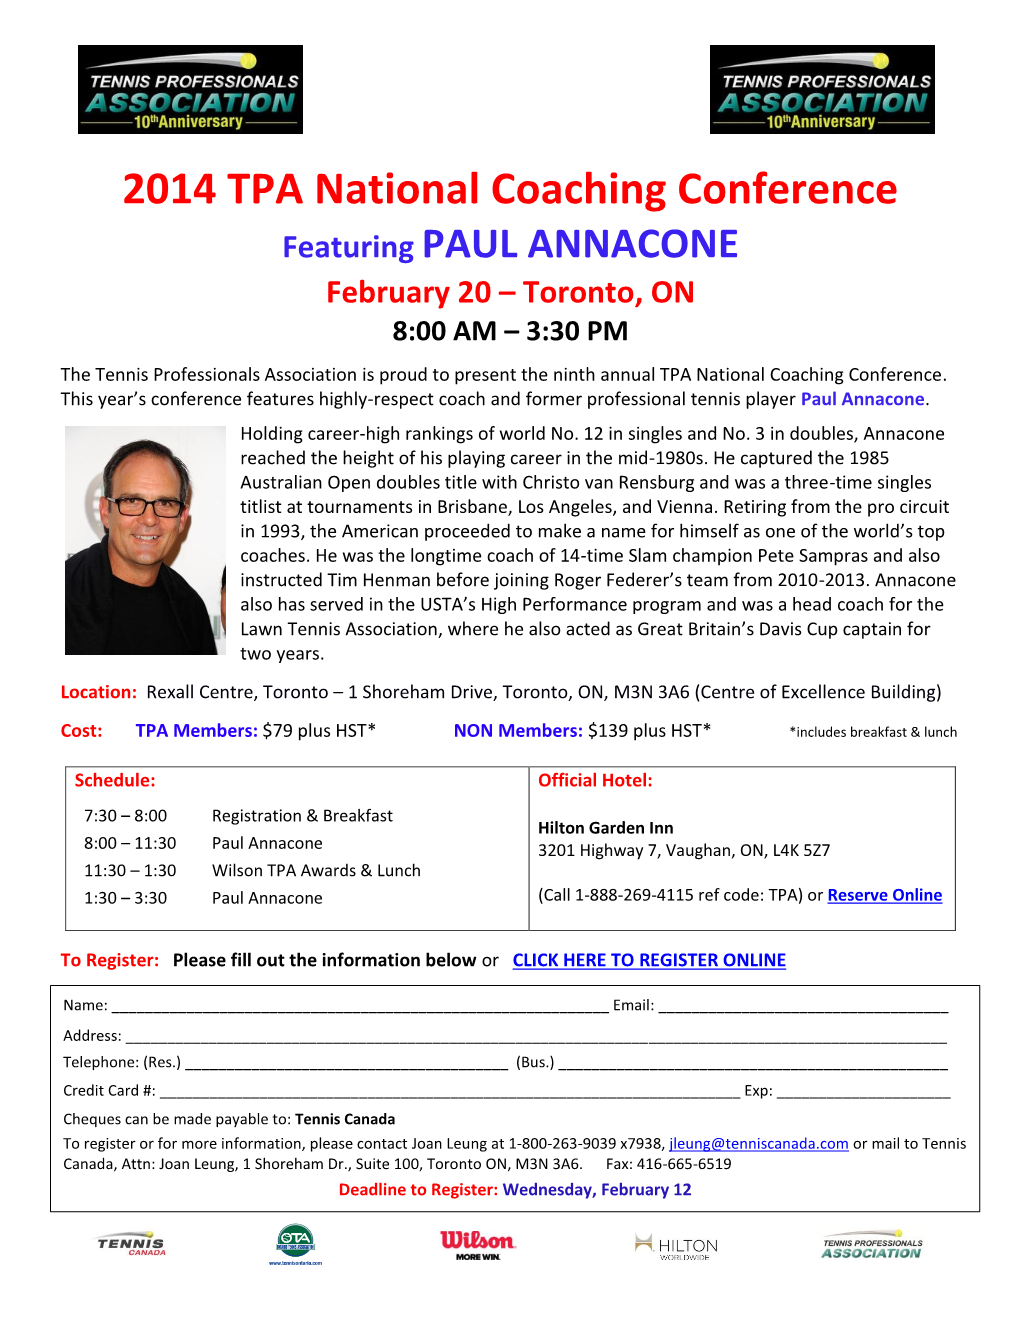 TPA National Coaching Conference Featuring PAUL ANNACONE